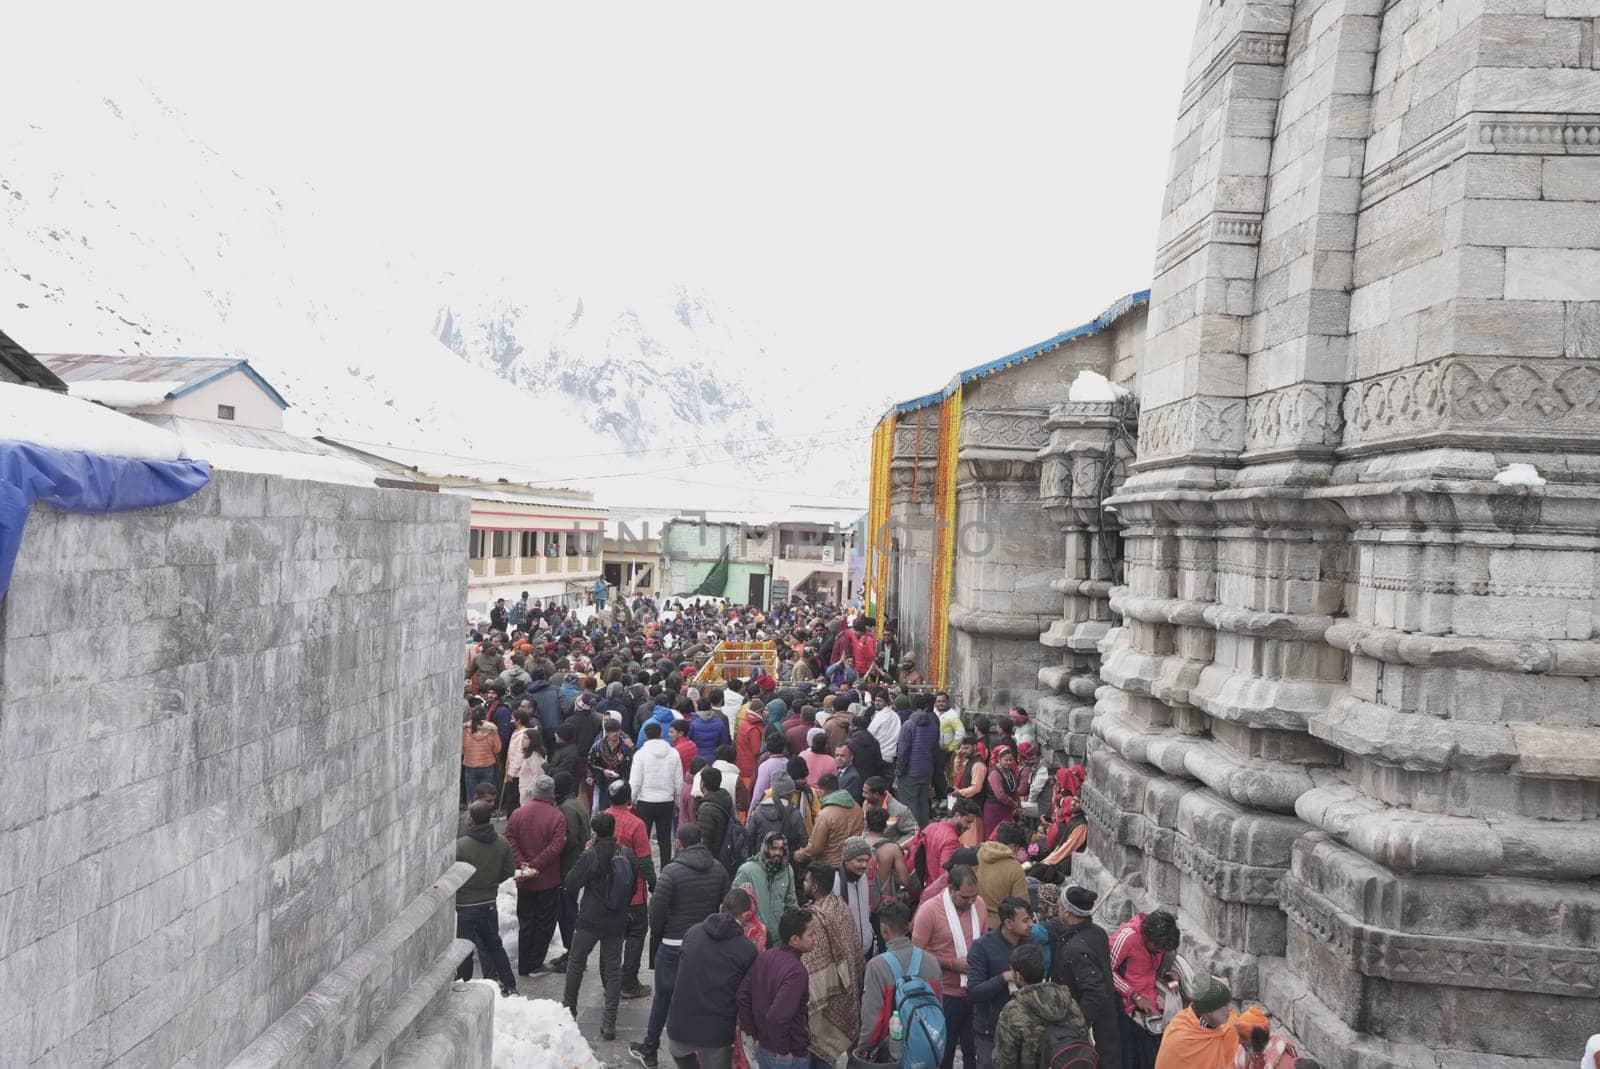 In the shadow of the divine, the crowd at Kedarnath weaves a tapestry of faith and beauty.4k footage